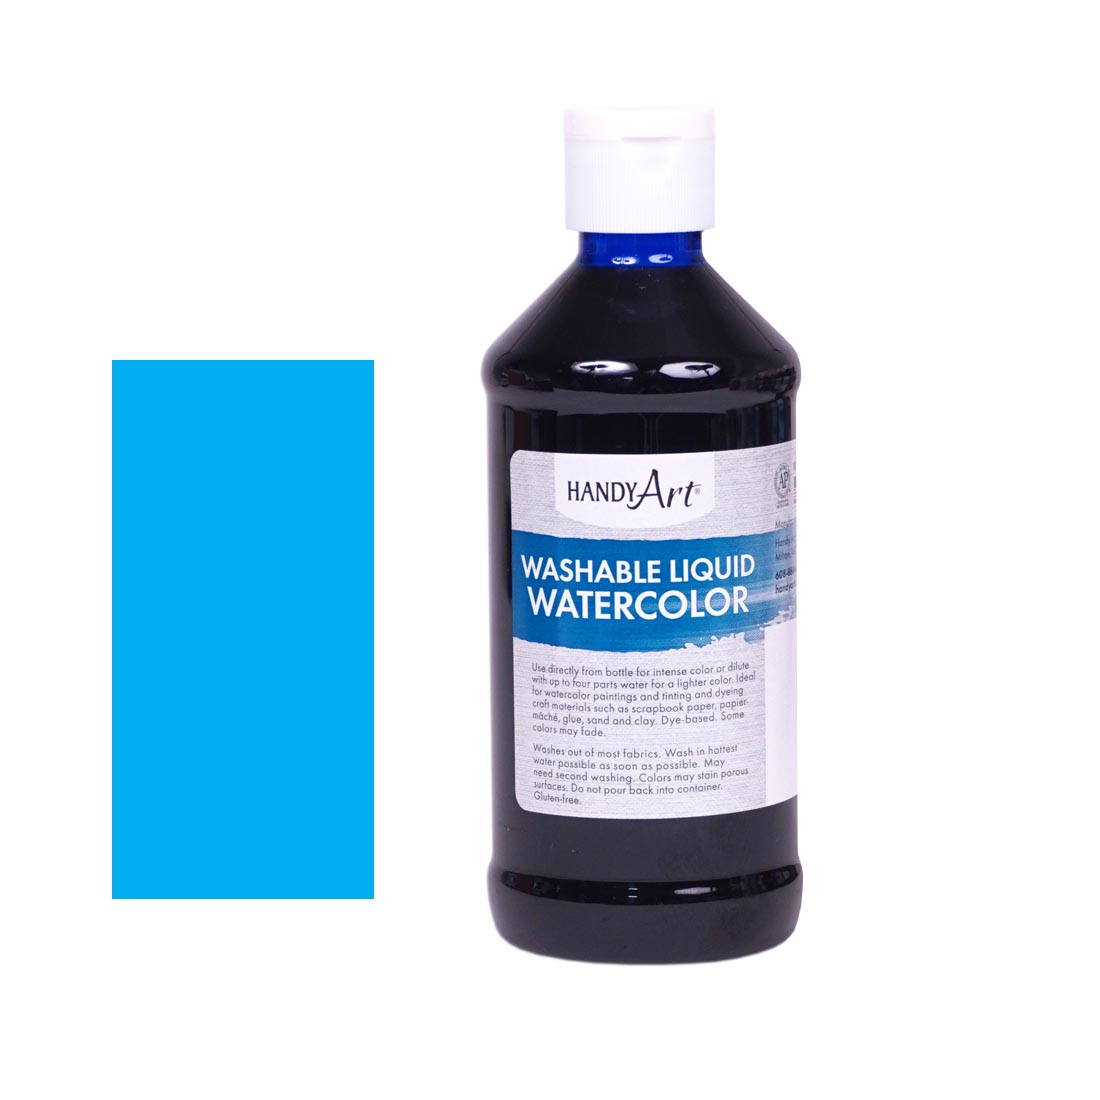 Bottle of Turquoise Handy Art Washable Liquid Watercolor beside a rectangular color swatch